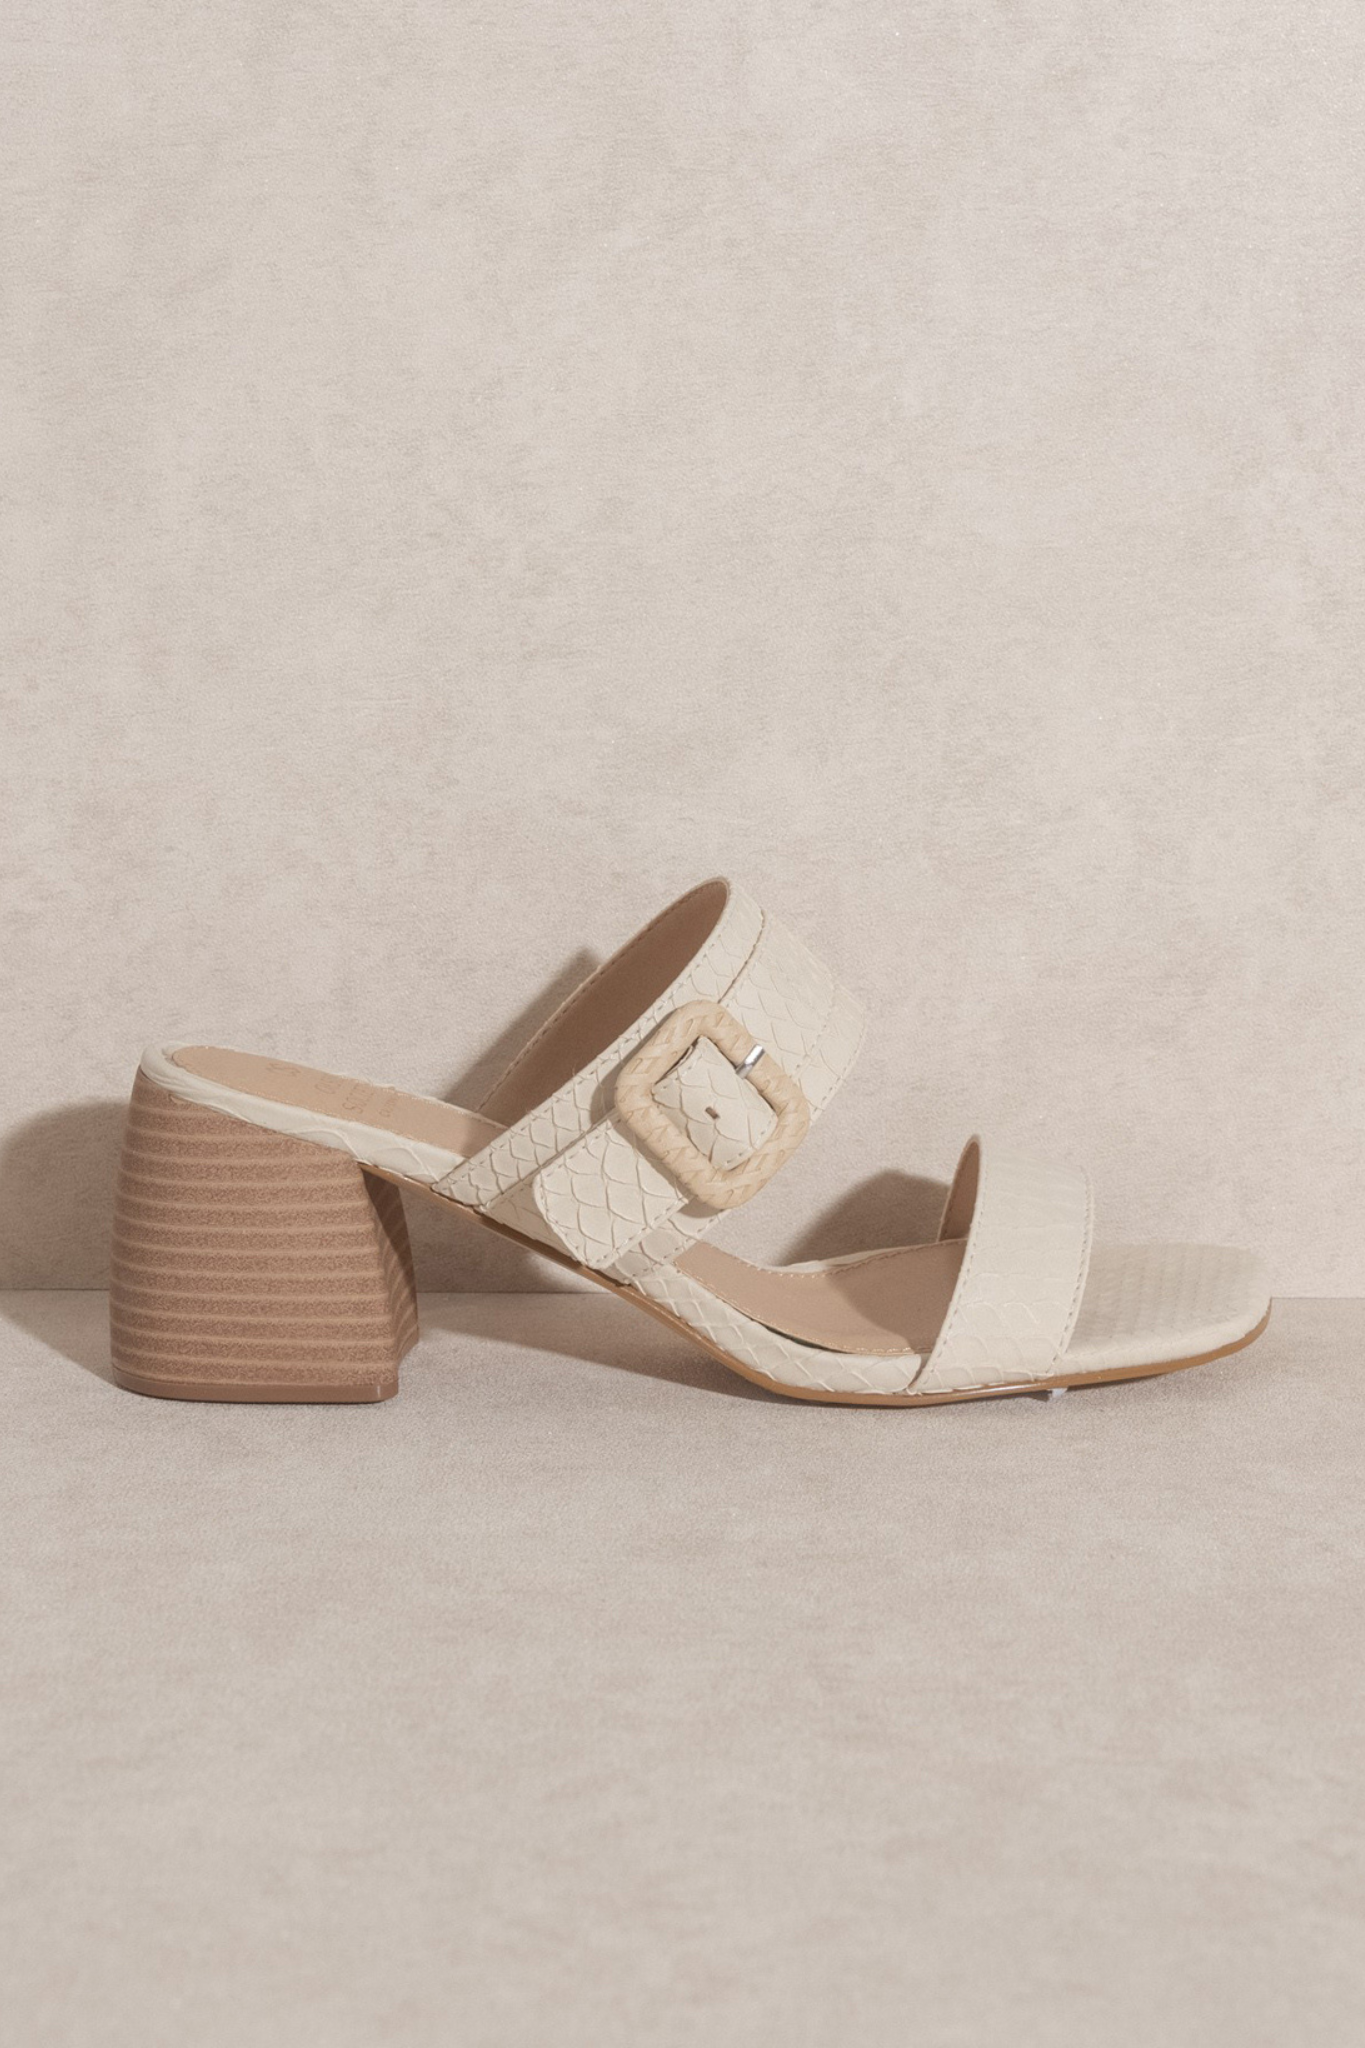 View 1 of Nicole Buckle Block Heel in Off White, a Shoes from Larrea Cove. Detail: The Nicole Buckle Block Heel in Off White is the perfect shoe...